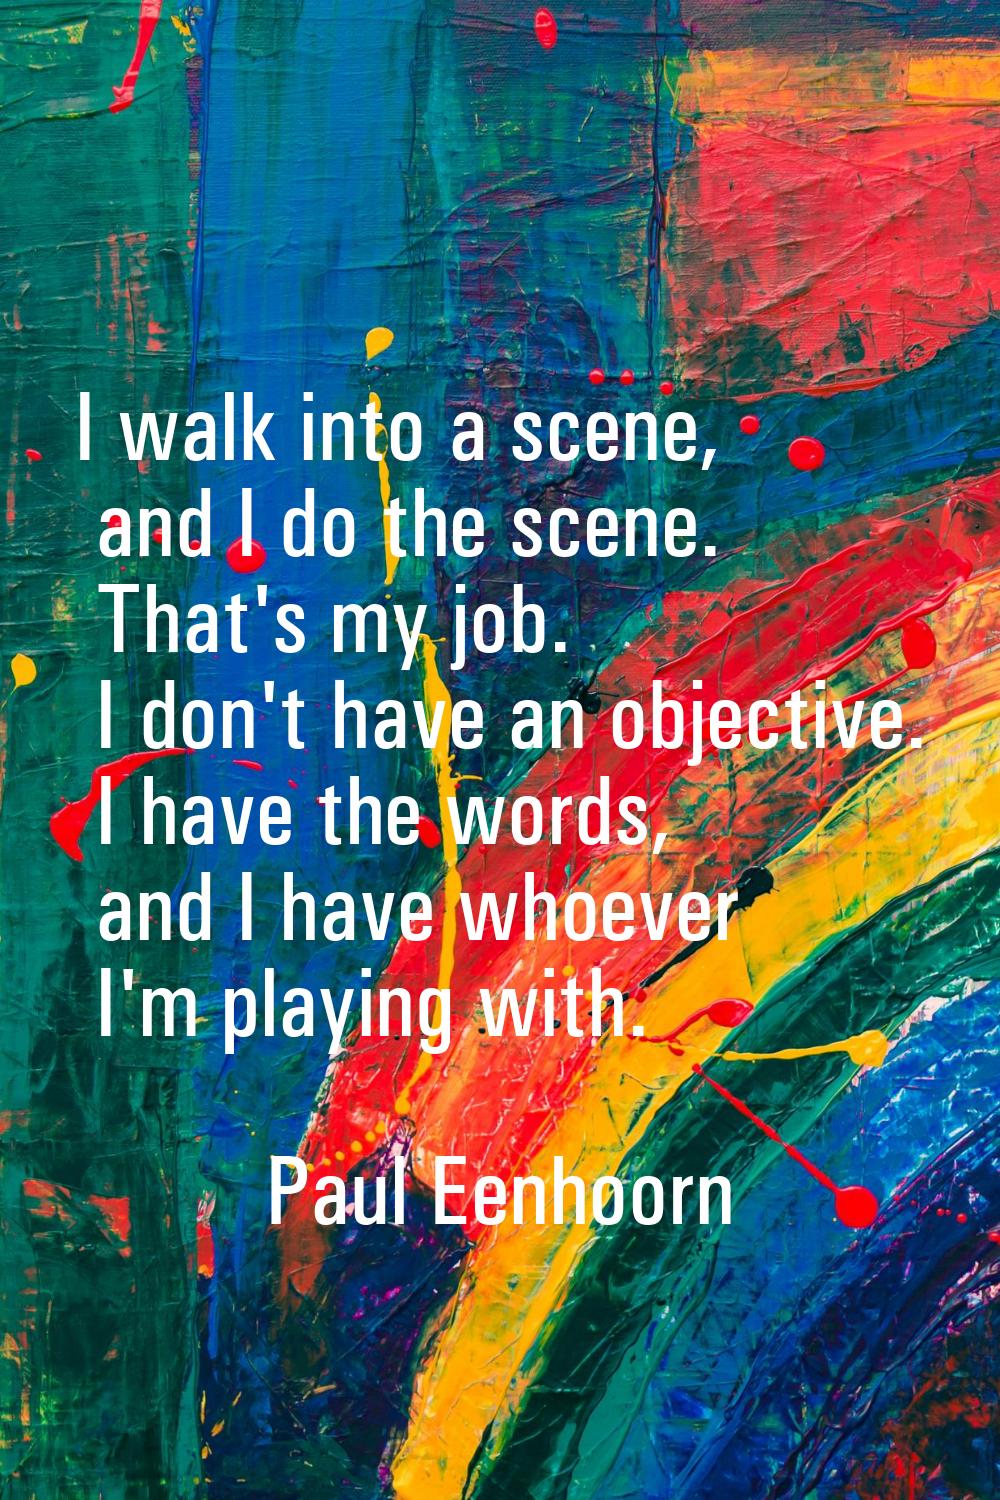 I walk into a scene, and I do the scene. That's my job. I don't have an objective. I have the words